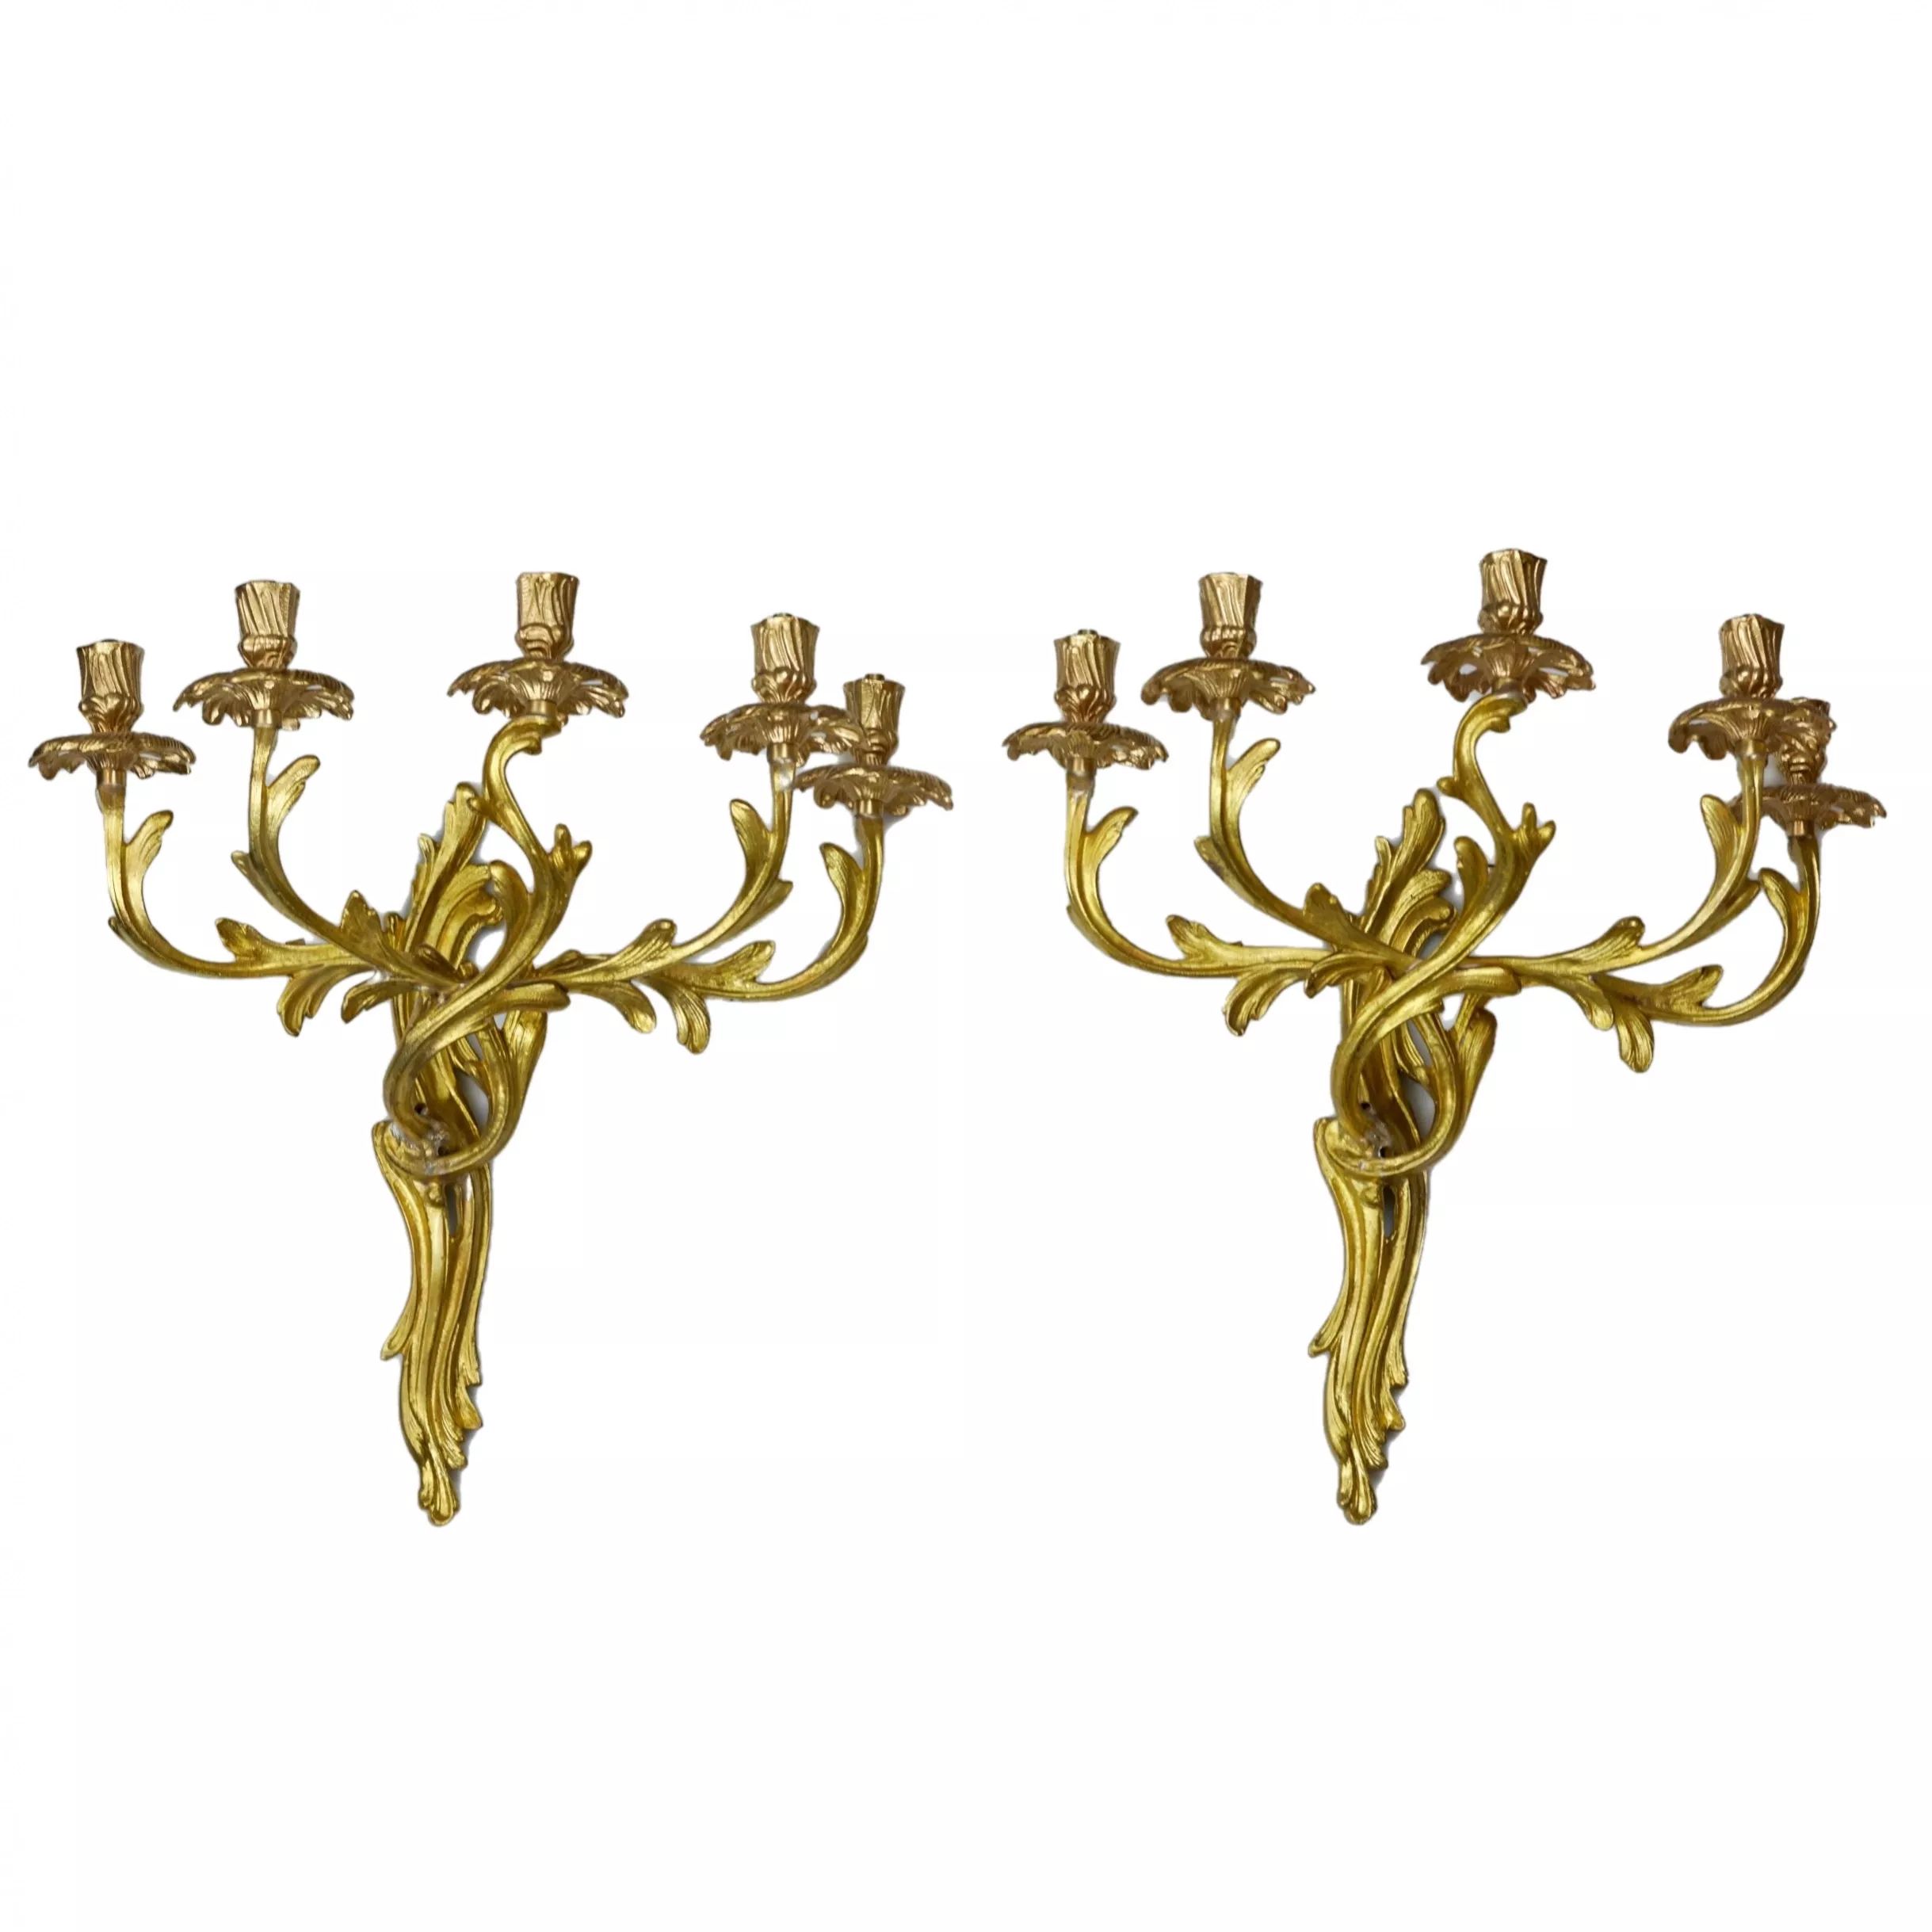 Pair-of-bronze-sconces-The-turn-of-the-19th-and-20th-centuries-